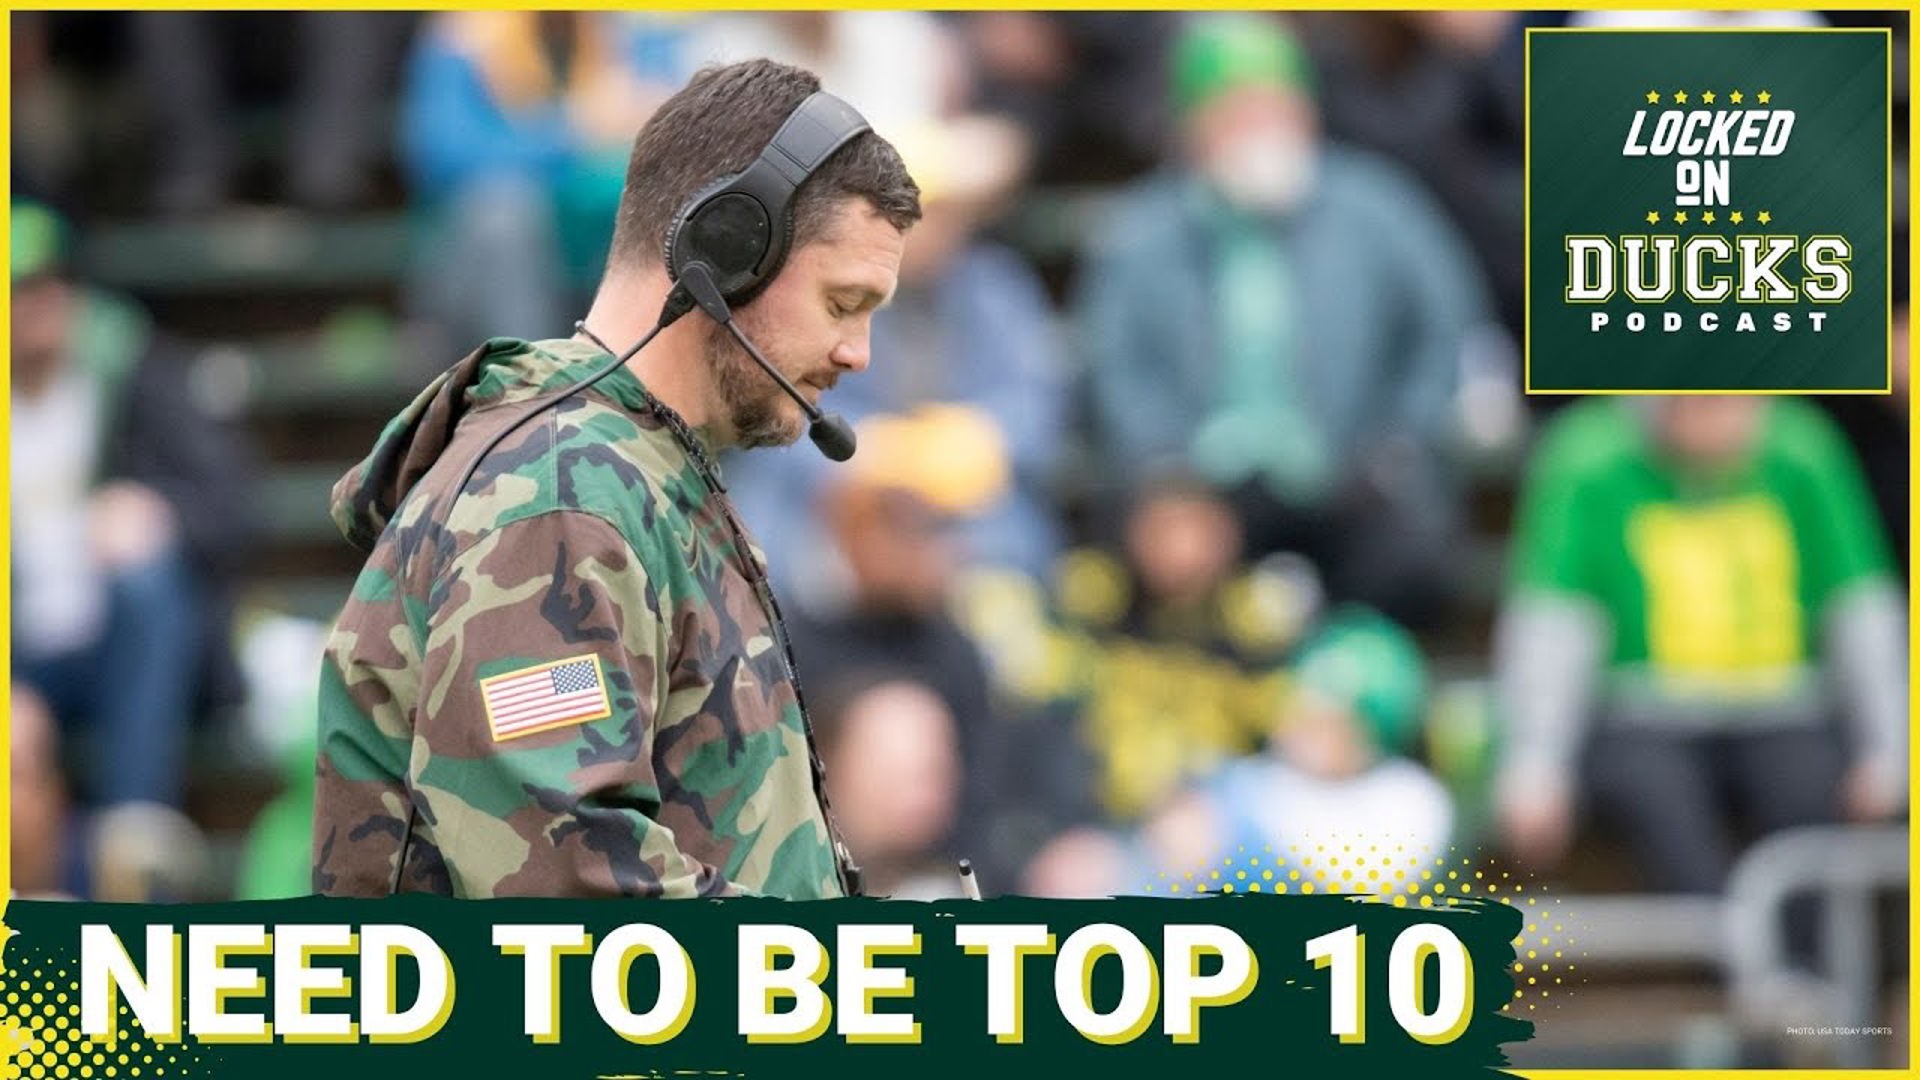 Oregon has pulled in back-to-back top 10 recruiting classes nationally, and that is poised to continue as they enter the Big 10.